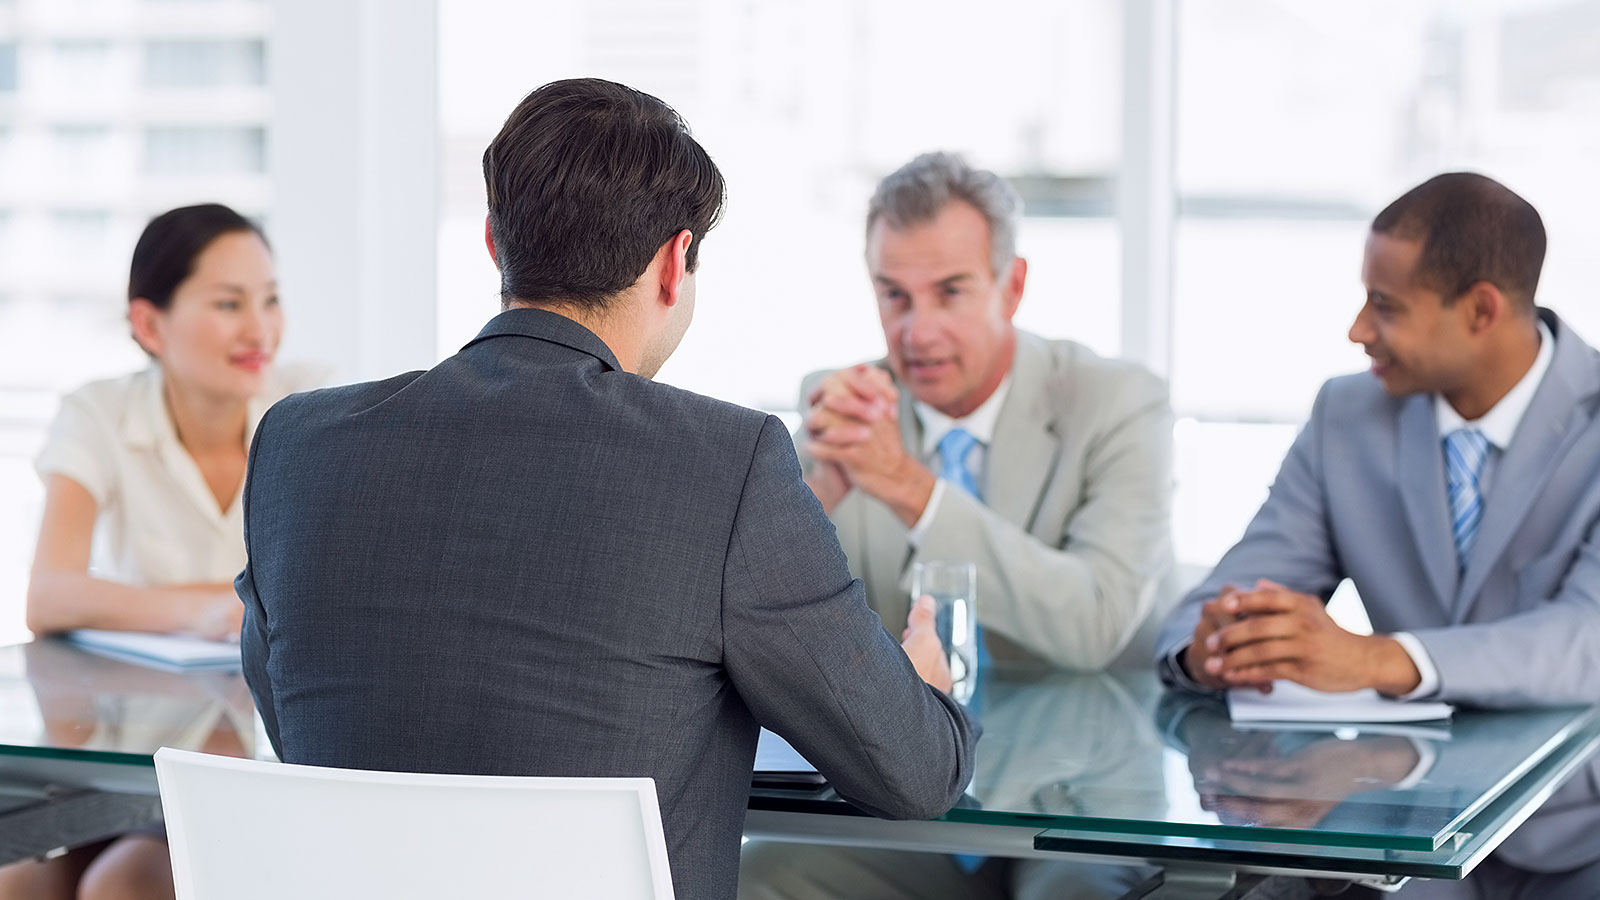 Job Interviews – Interview Questions You Need To Know About